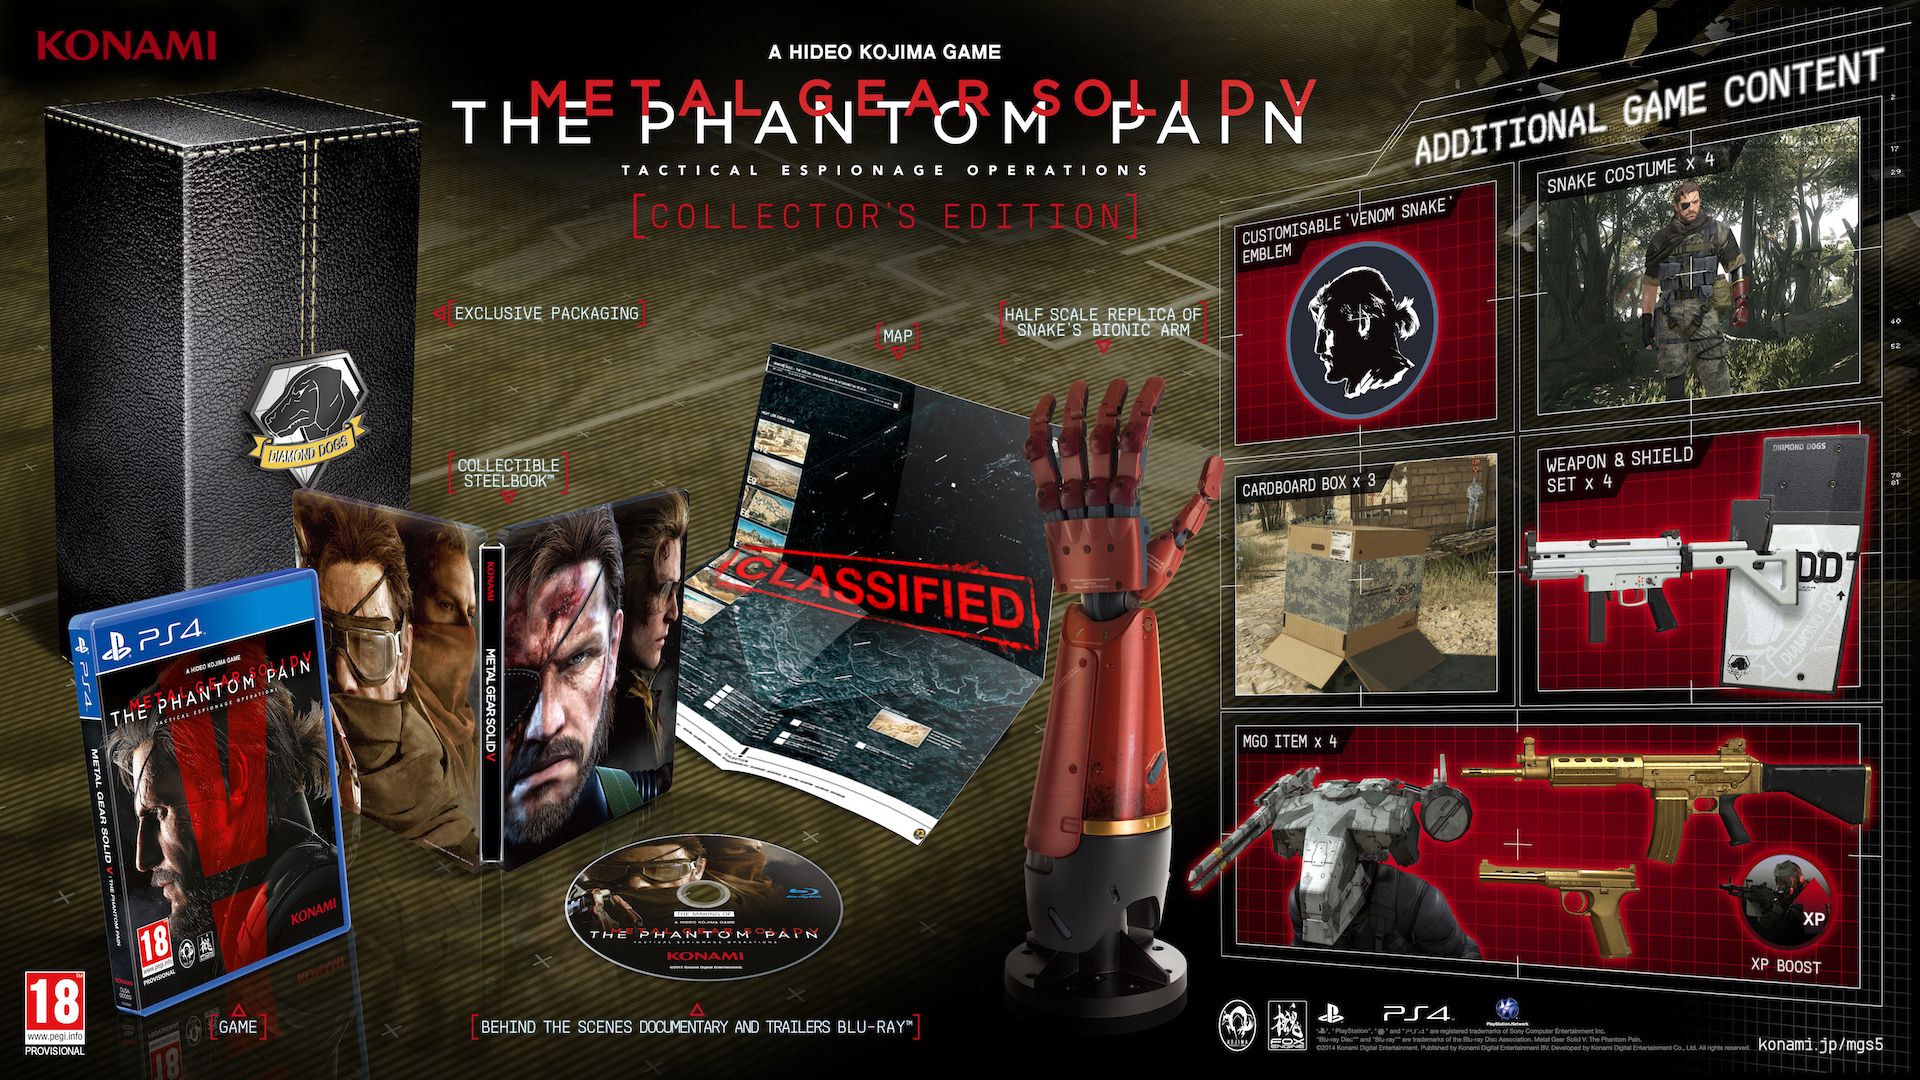 Metal Gear Solid 5 The Phantom Pain - collector